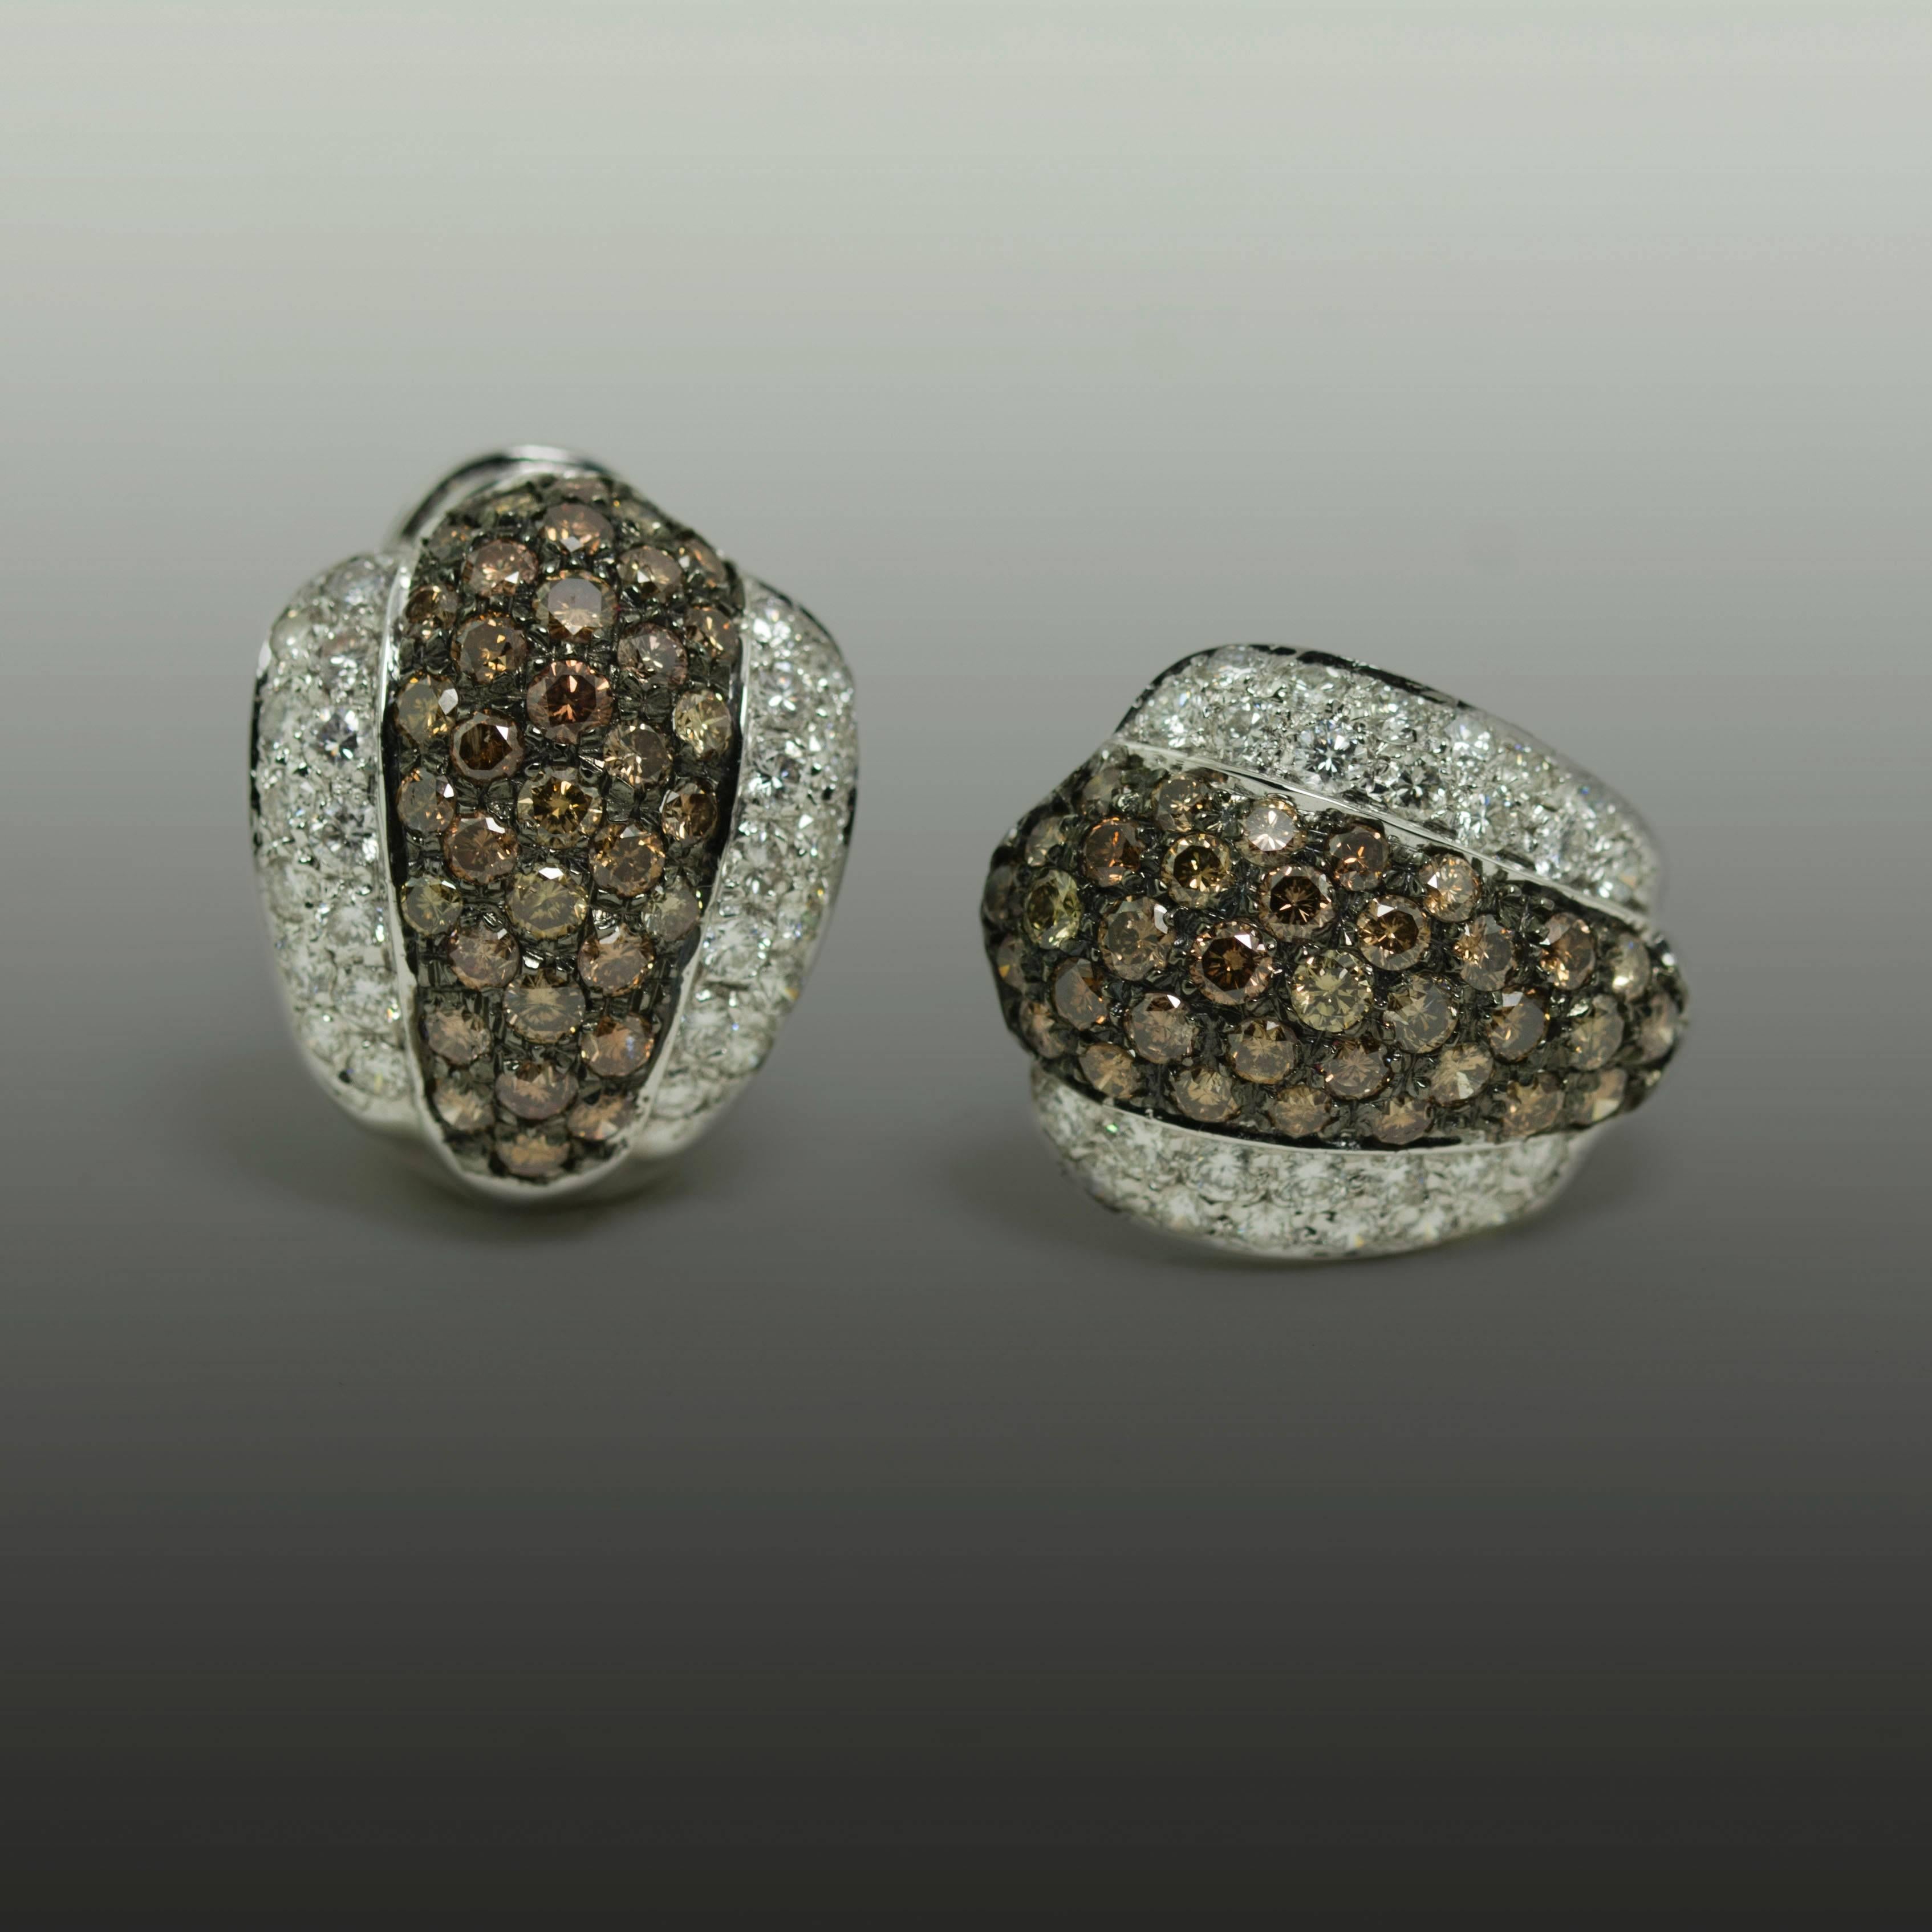 Platinum Earrings with 4.20 carats of pave set chocolate diamonds and 1.56 carats of fine white diamonds, French hallmarks.